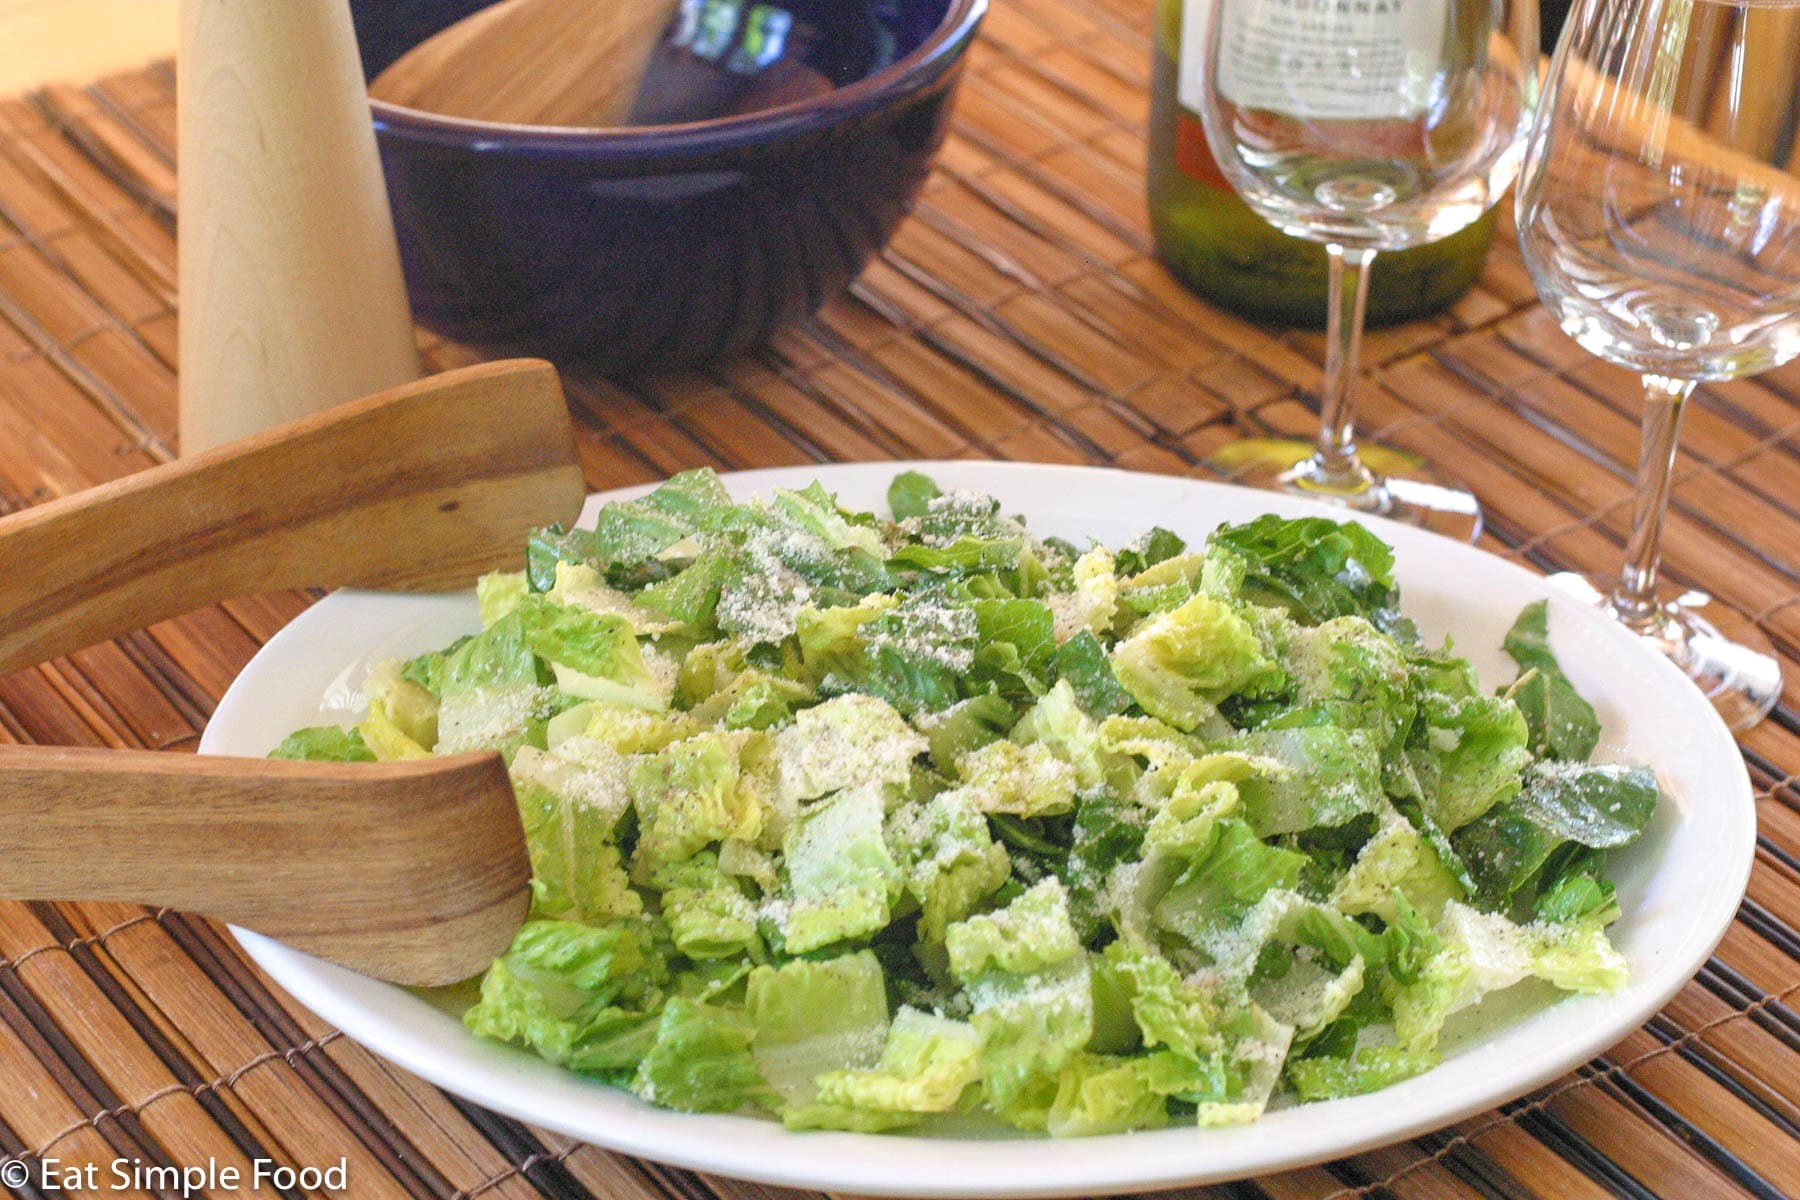 Chunked Romaine Lettuce on a white platter dusted with Parmesan cheese. Tongs on side. 2 glasses of empty wine glasses on side.